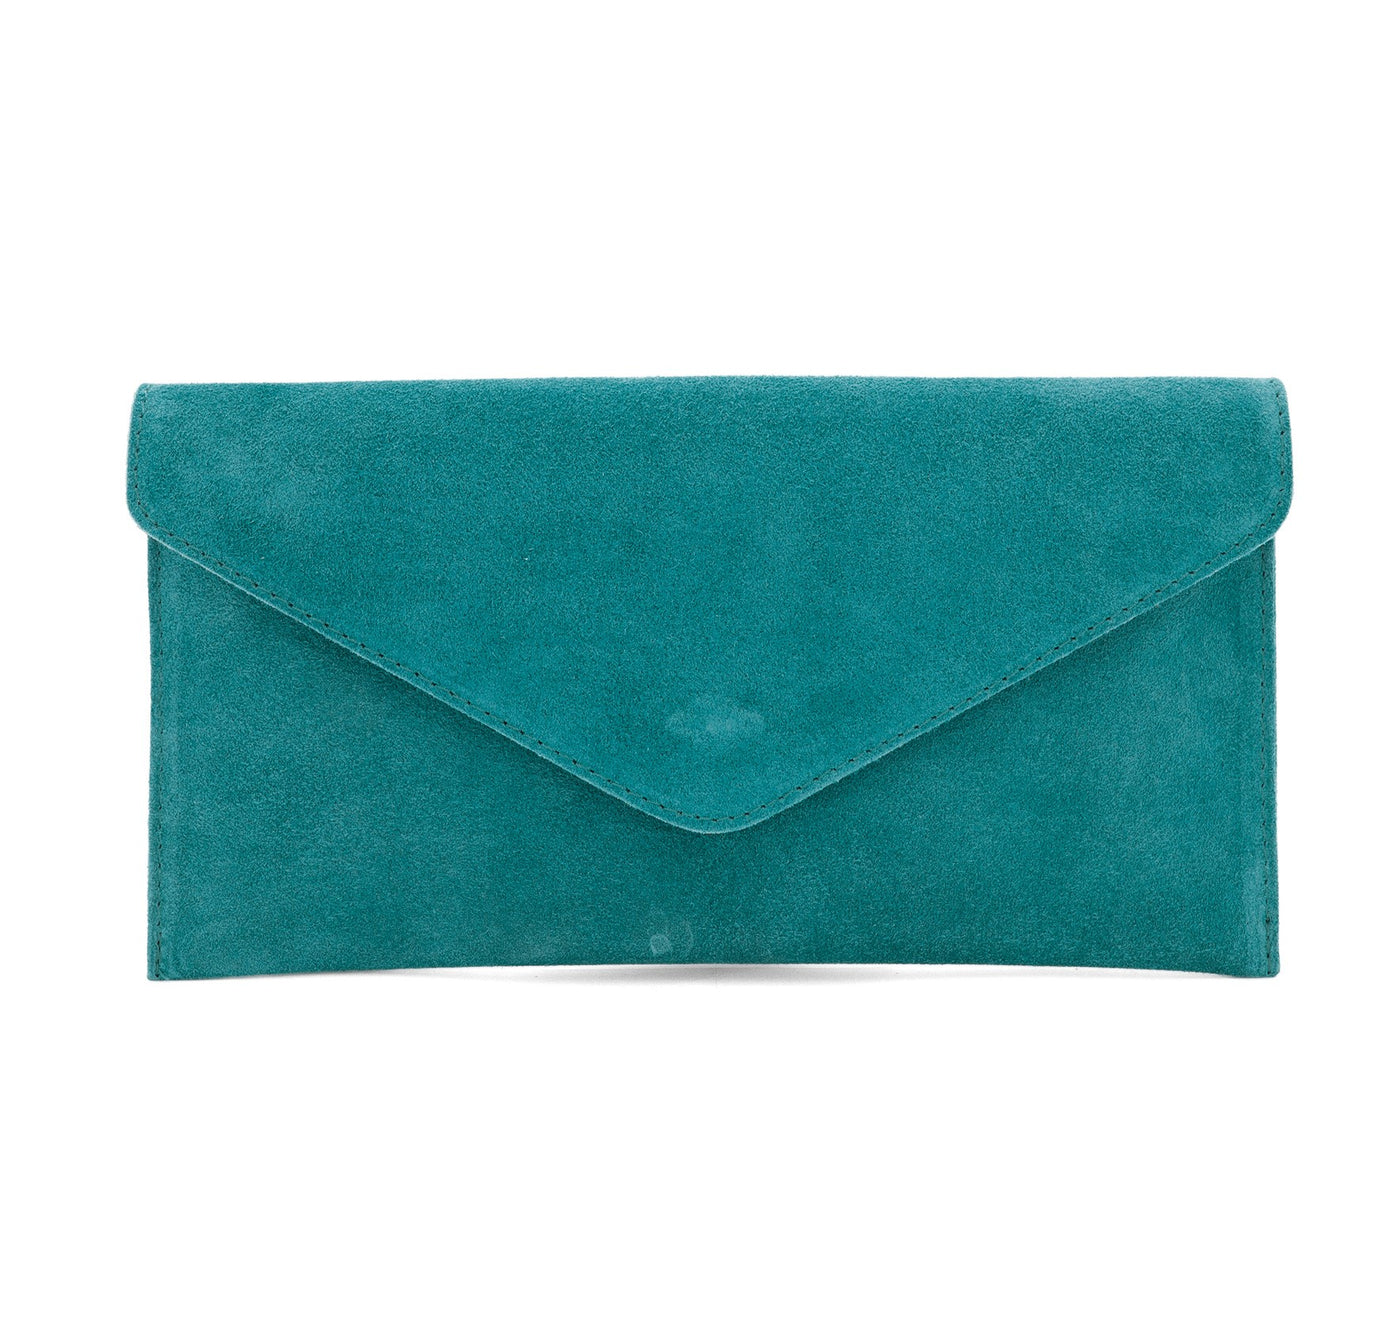 Teal Suede Leather Clutch Bag